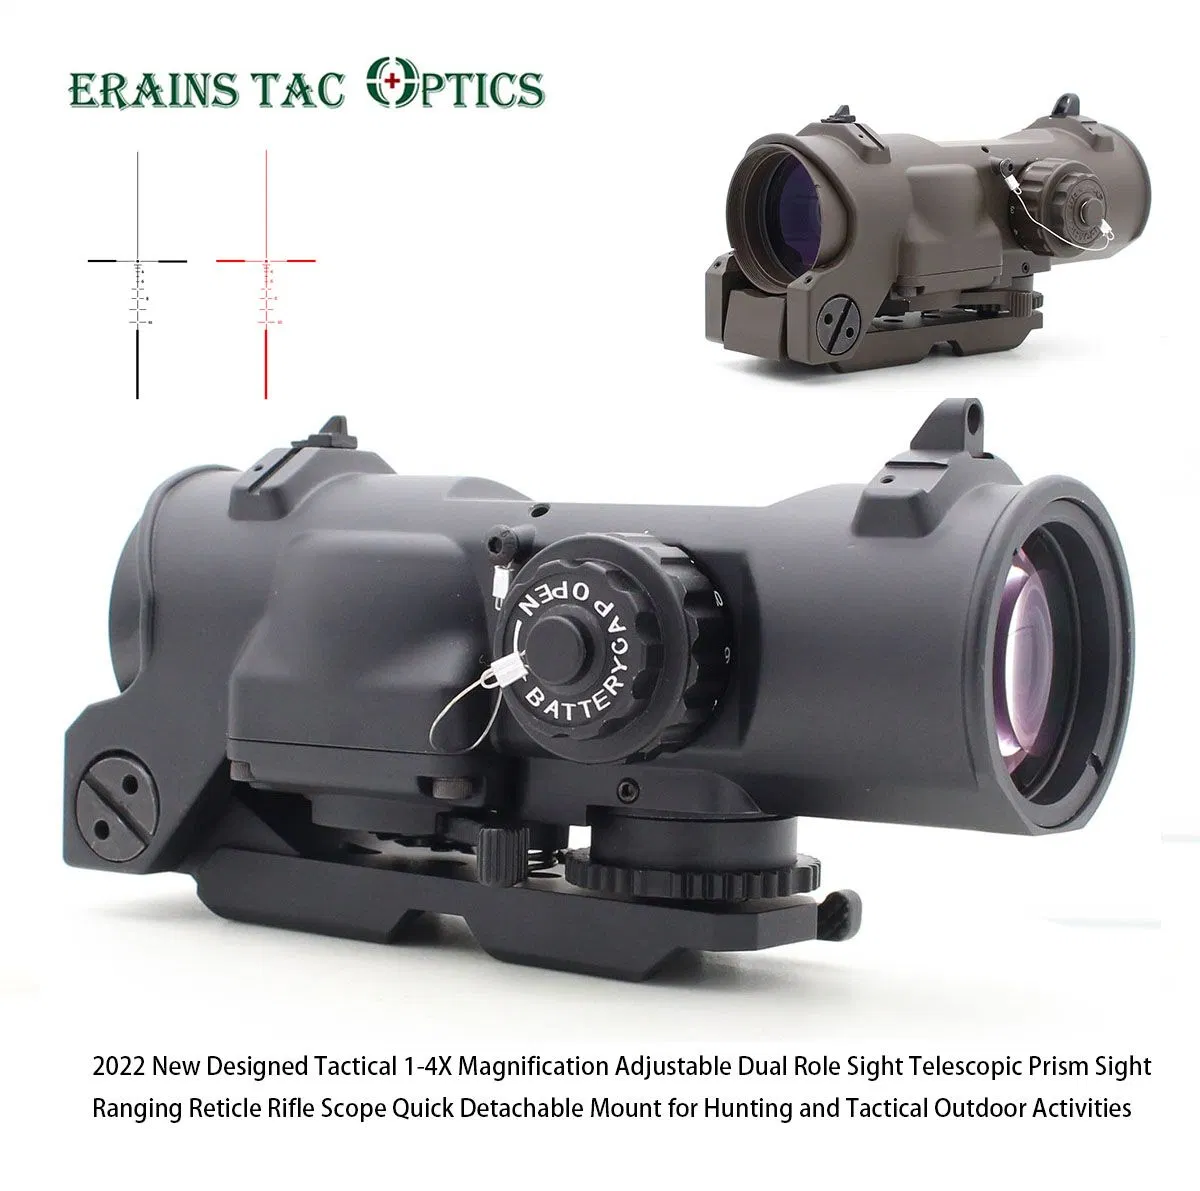 Tactical Heavy Duty Dual Role Sight Weapon Telescopic 1-4X Variable Magnification Prism Sight Red Illumination Ranging Reticle Prismatic Scope